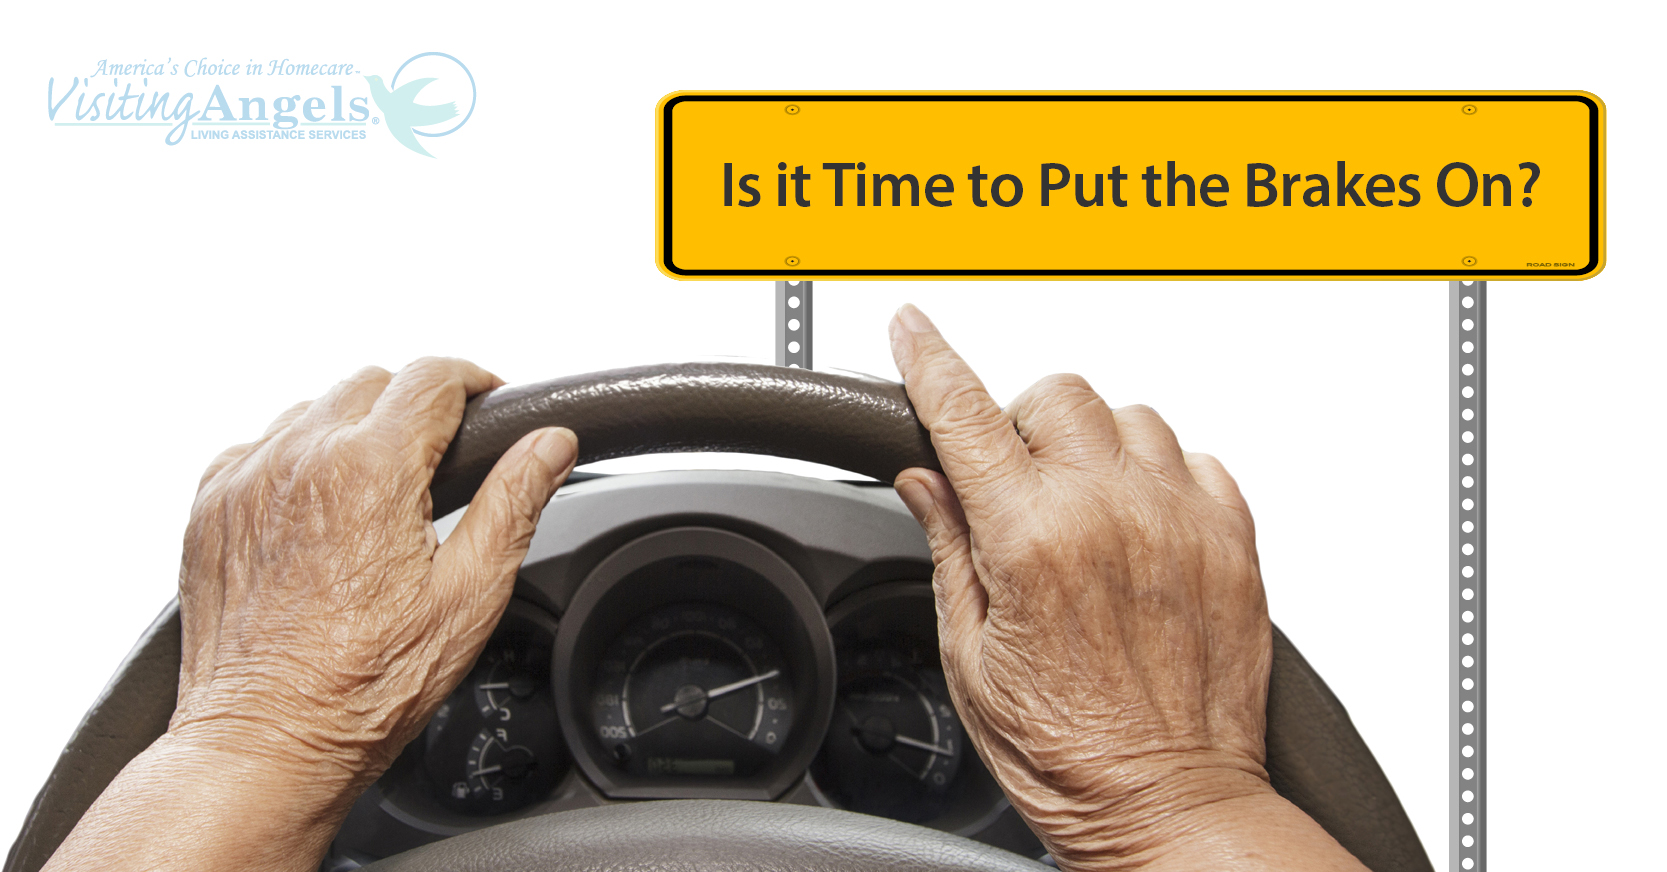 The Car Keys - When is it Time to Take the Keys Away from Elderly